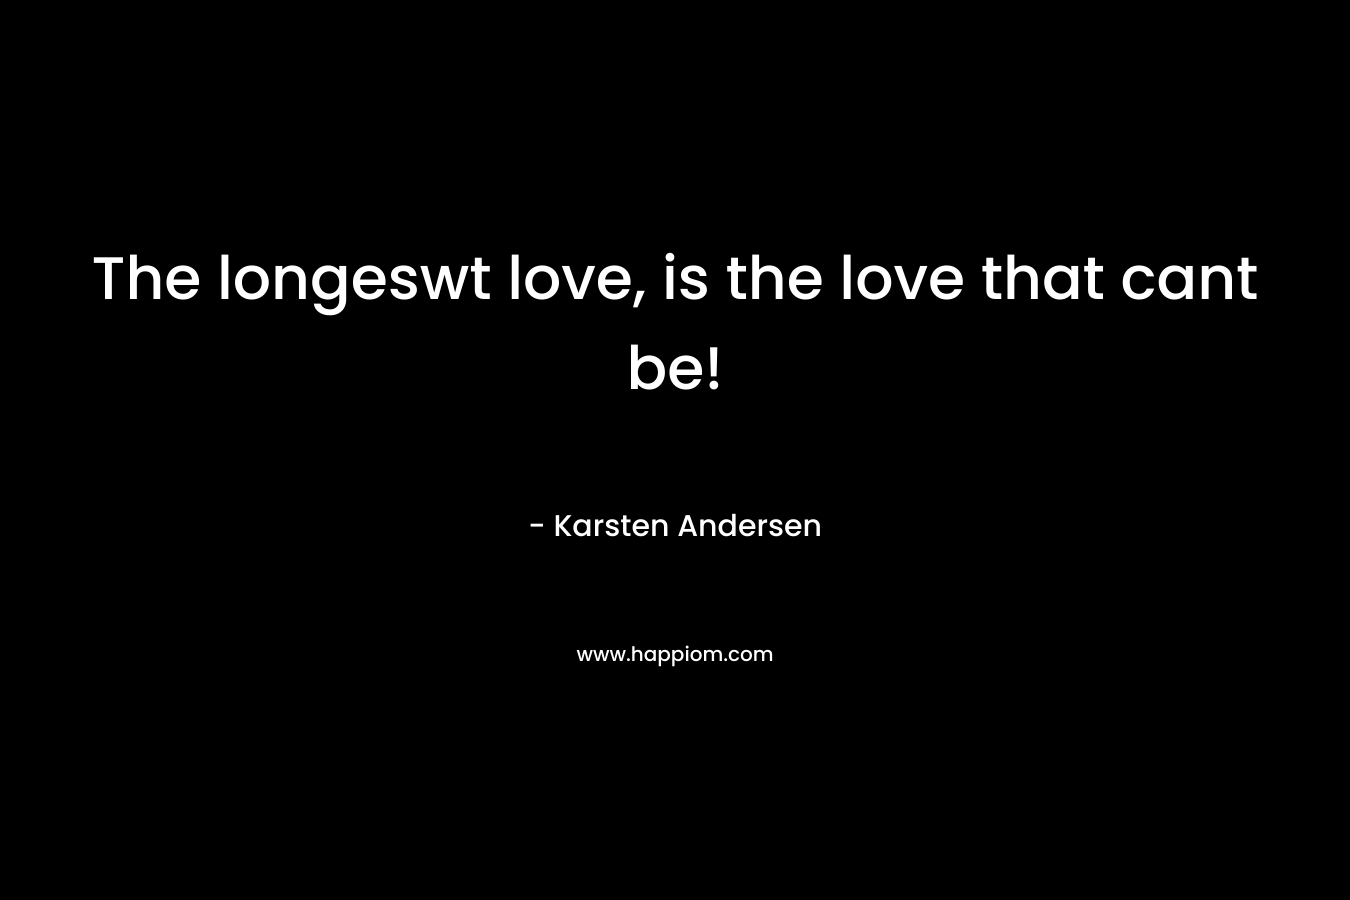 The longeswt love, is the love that cant be!